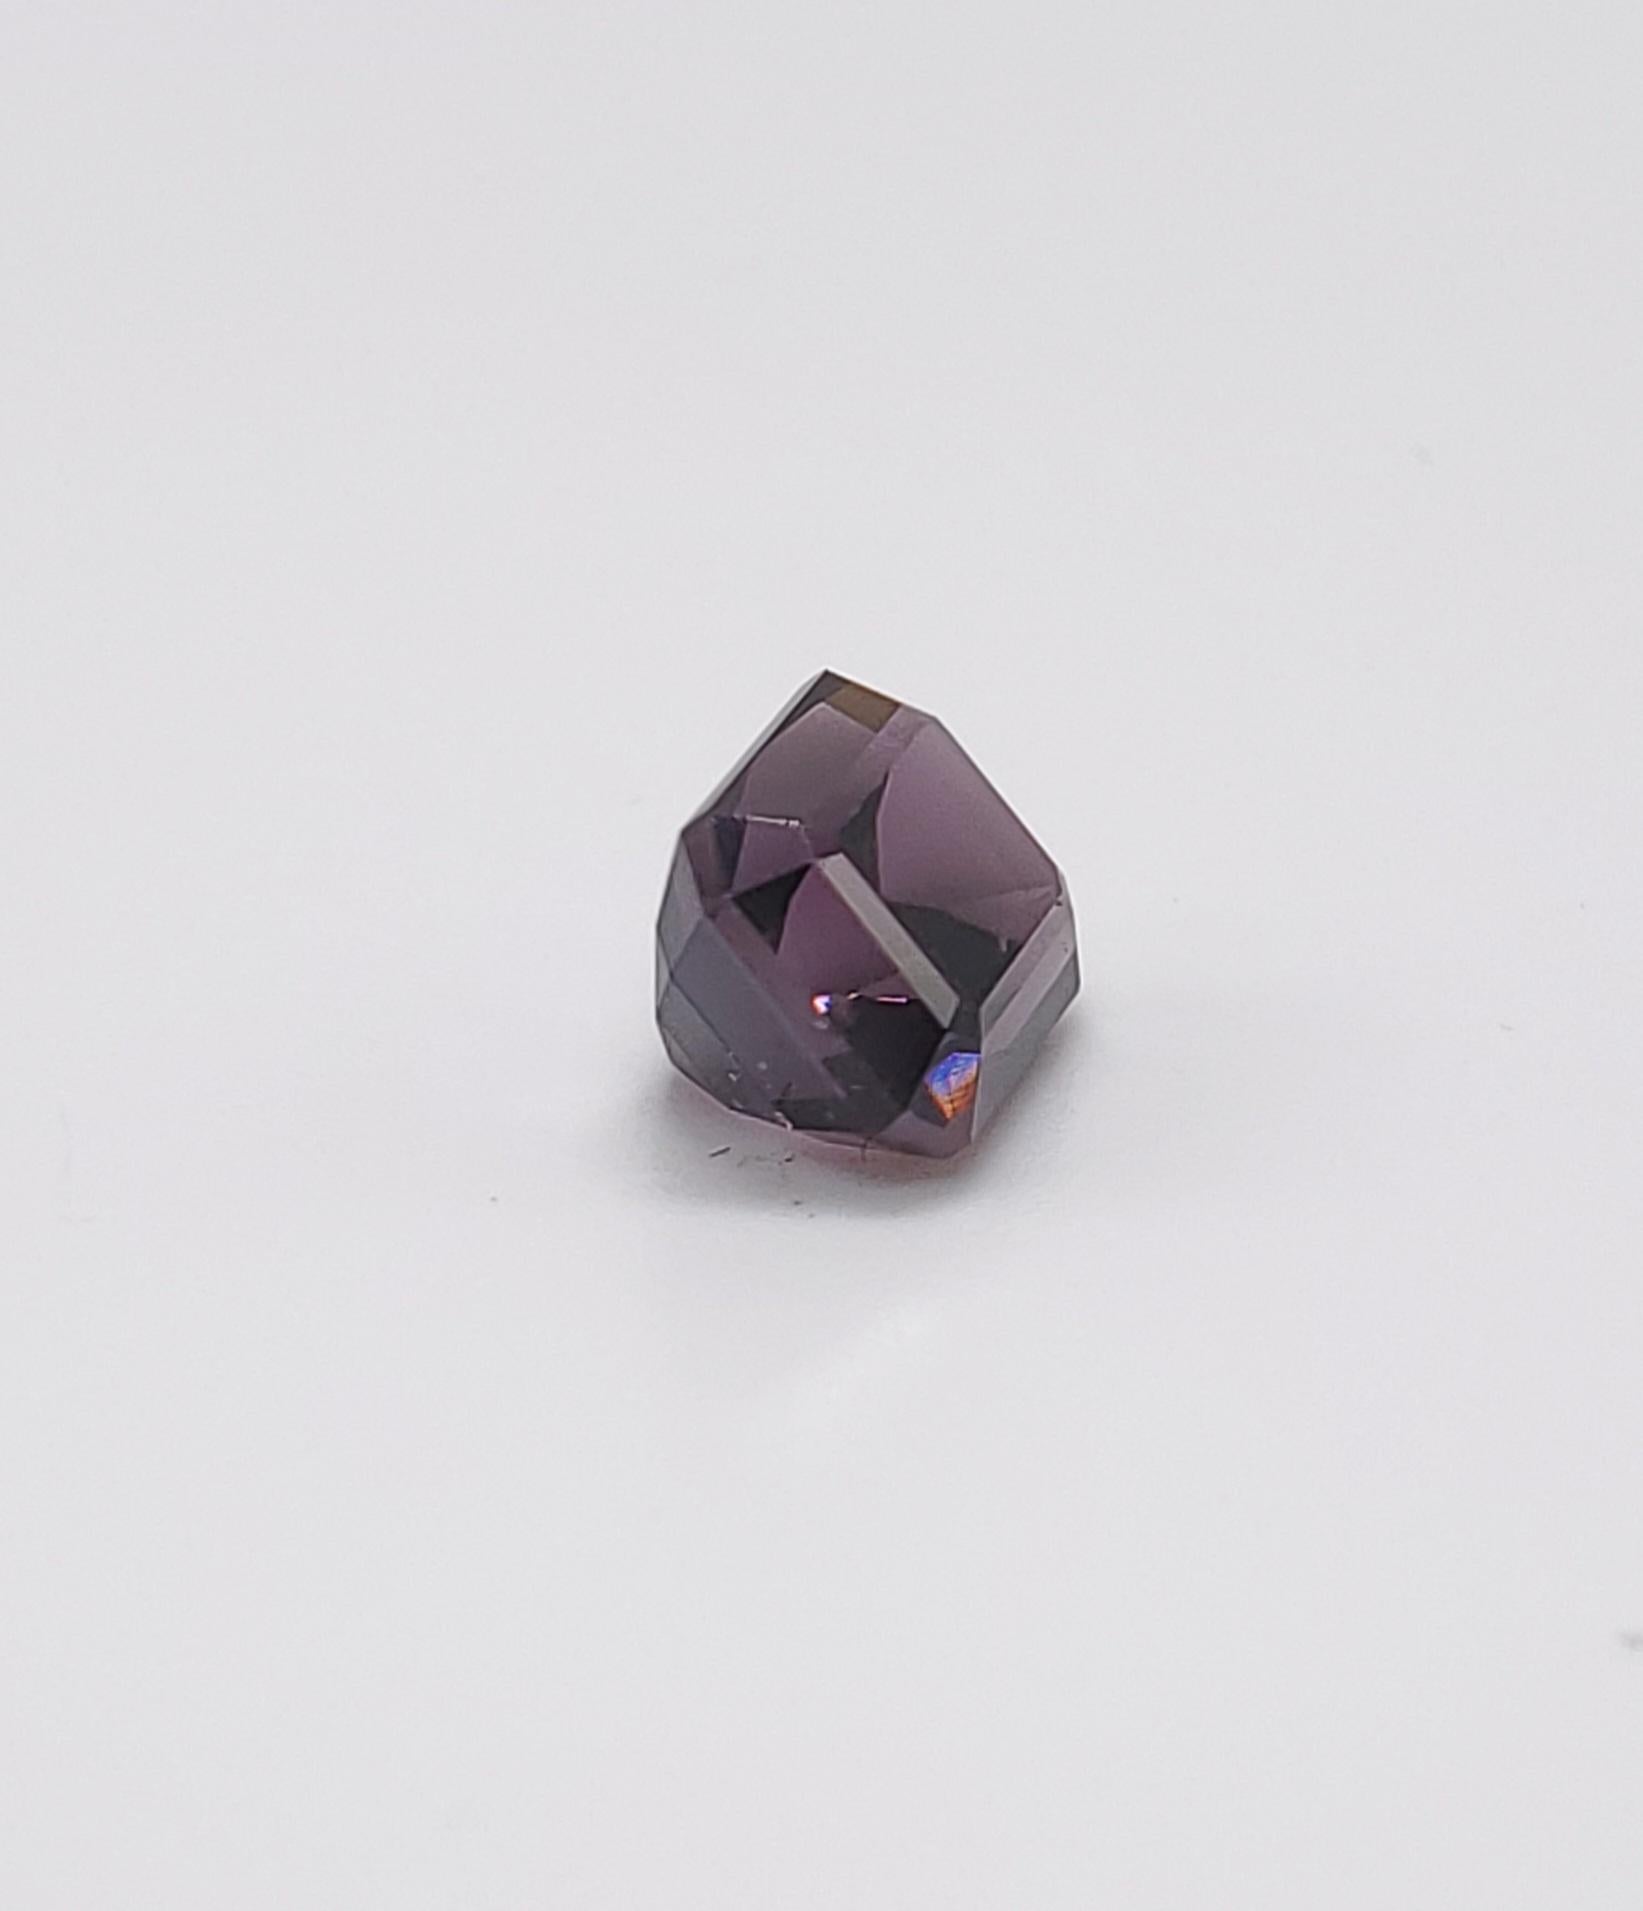 Octagon Cut GIA Certified 1.91 Carat Spinel For Sale